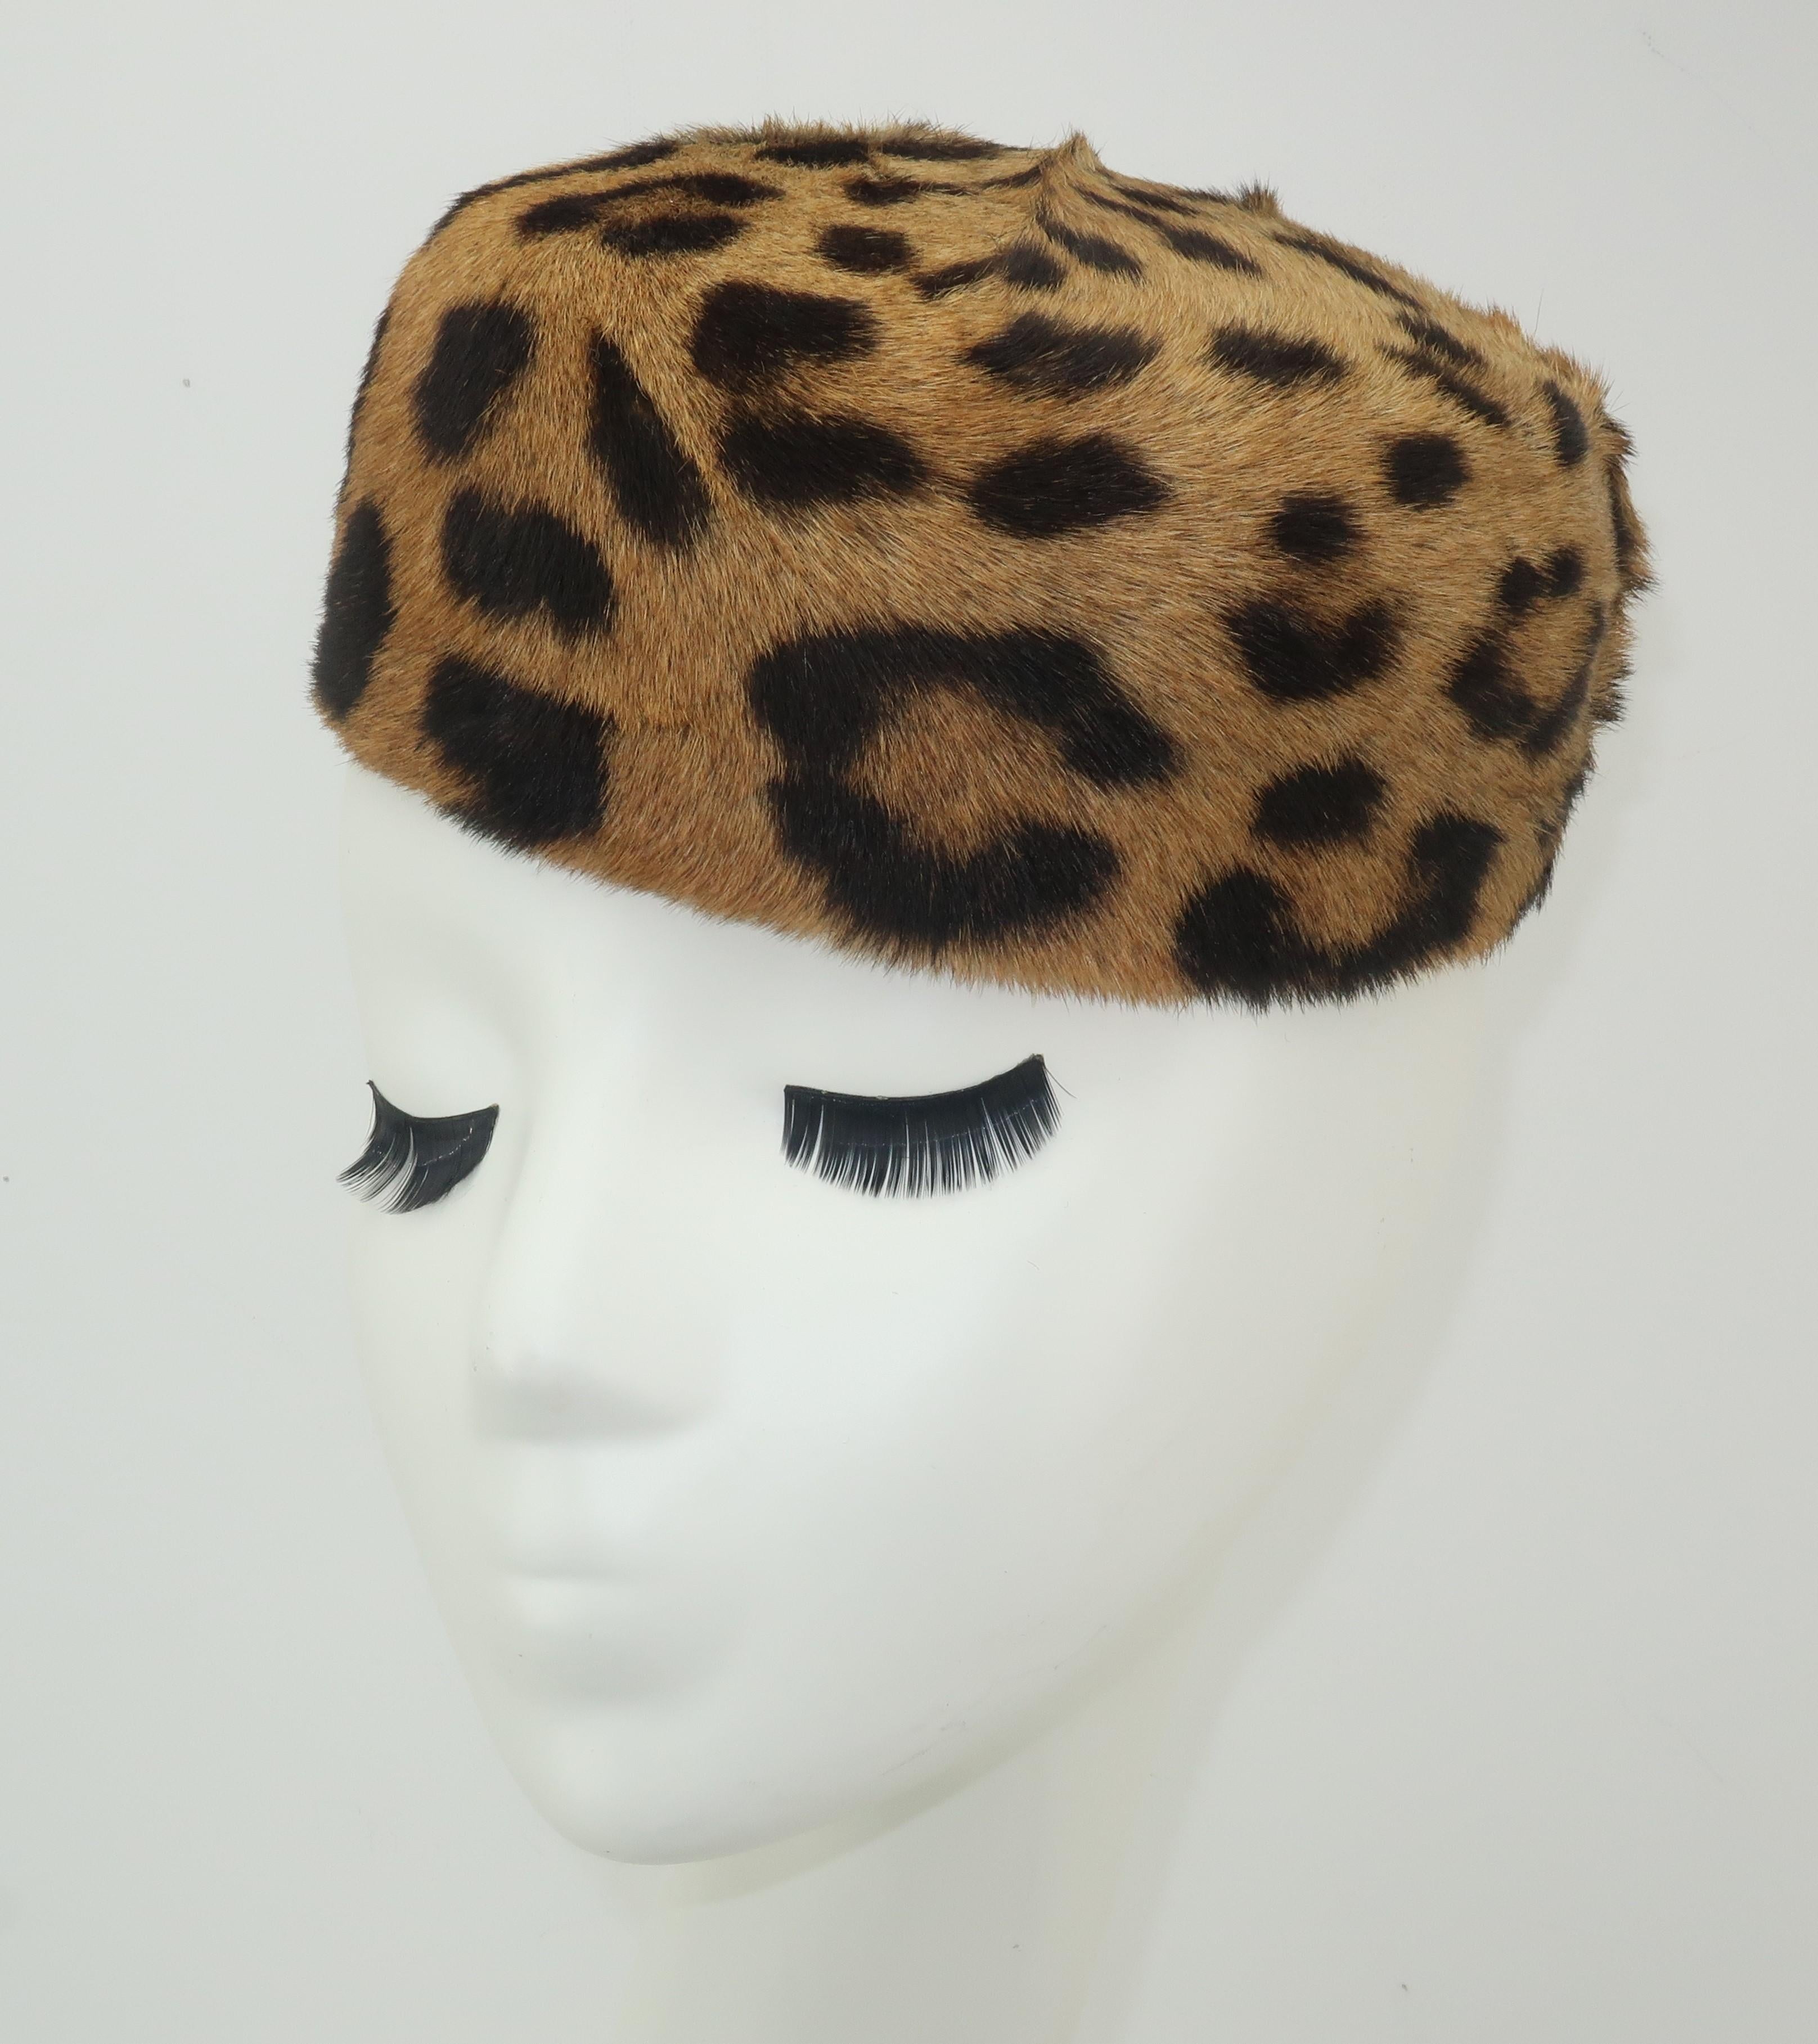 Add an exotic flavor to your wardrobe with this fashionable leopard printed fur pillbox hat.  The minimalist shape can be worn forward, back or cocked to one side.  Lined with grosgrain black fabric and accompanied by a vintage hat box from Muse’s,